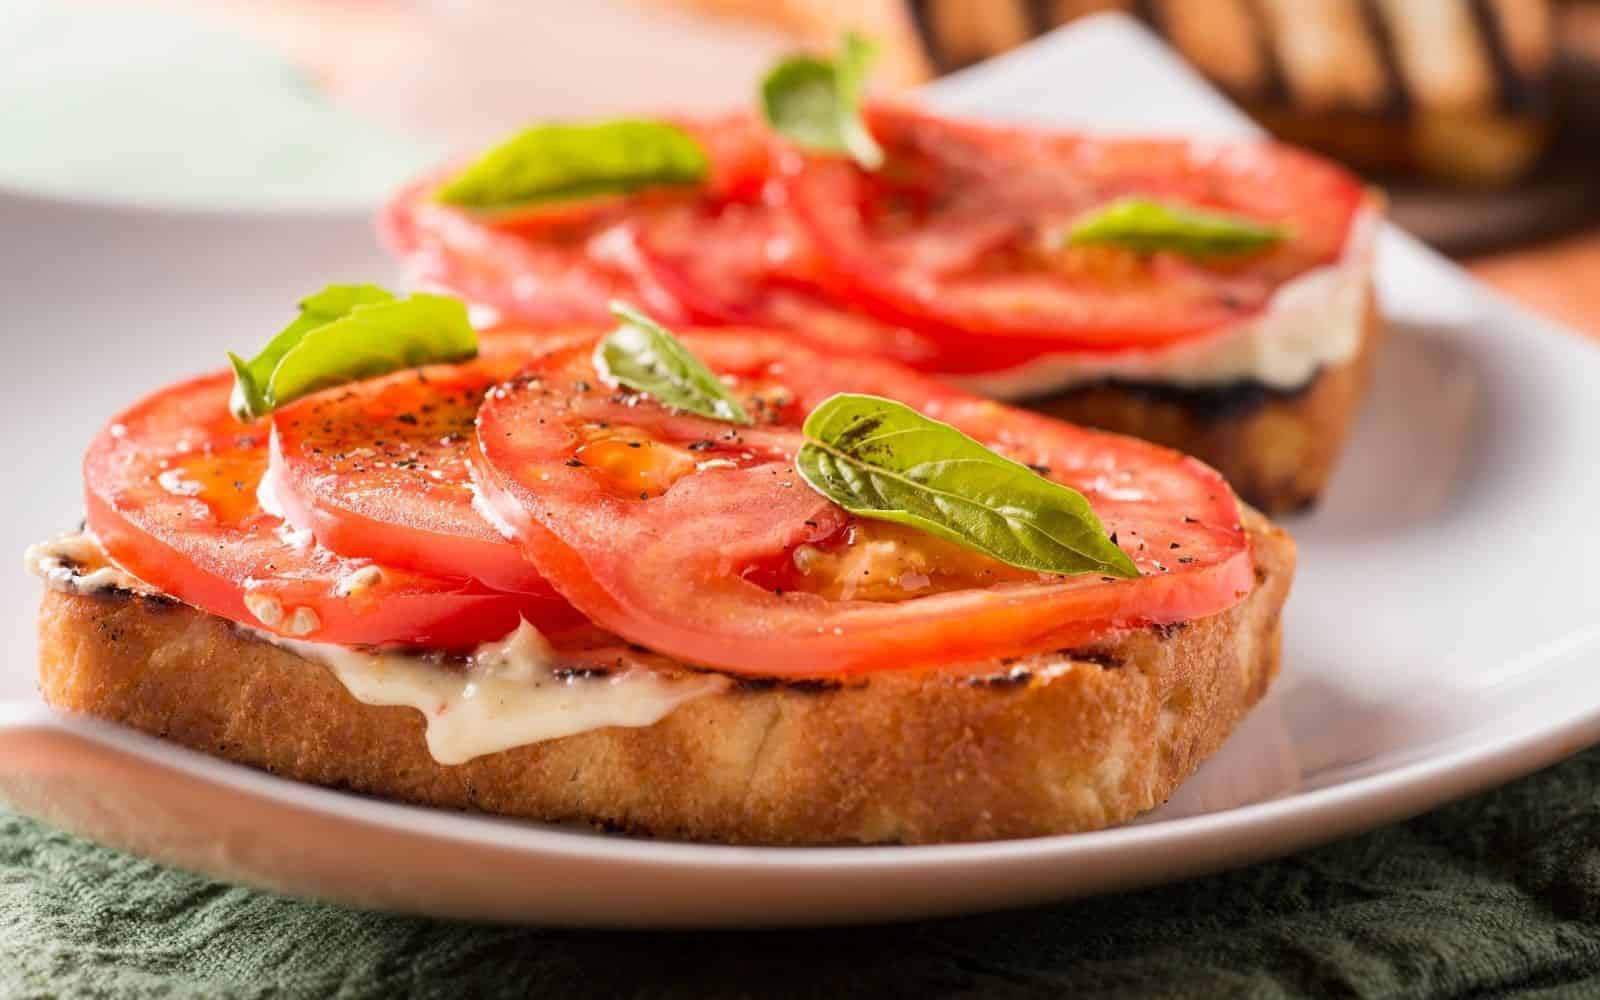 Best-tasting tomatoes for sandwiches